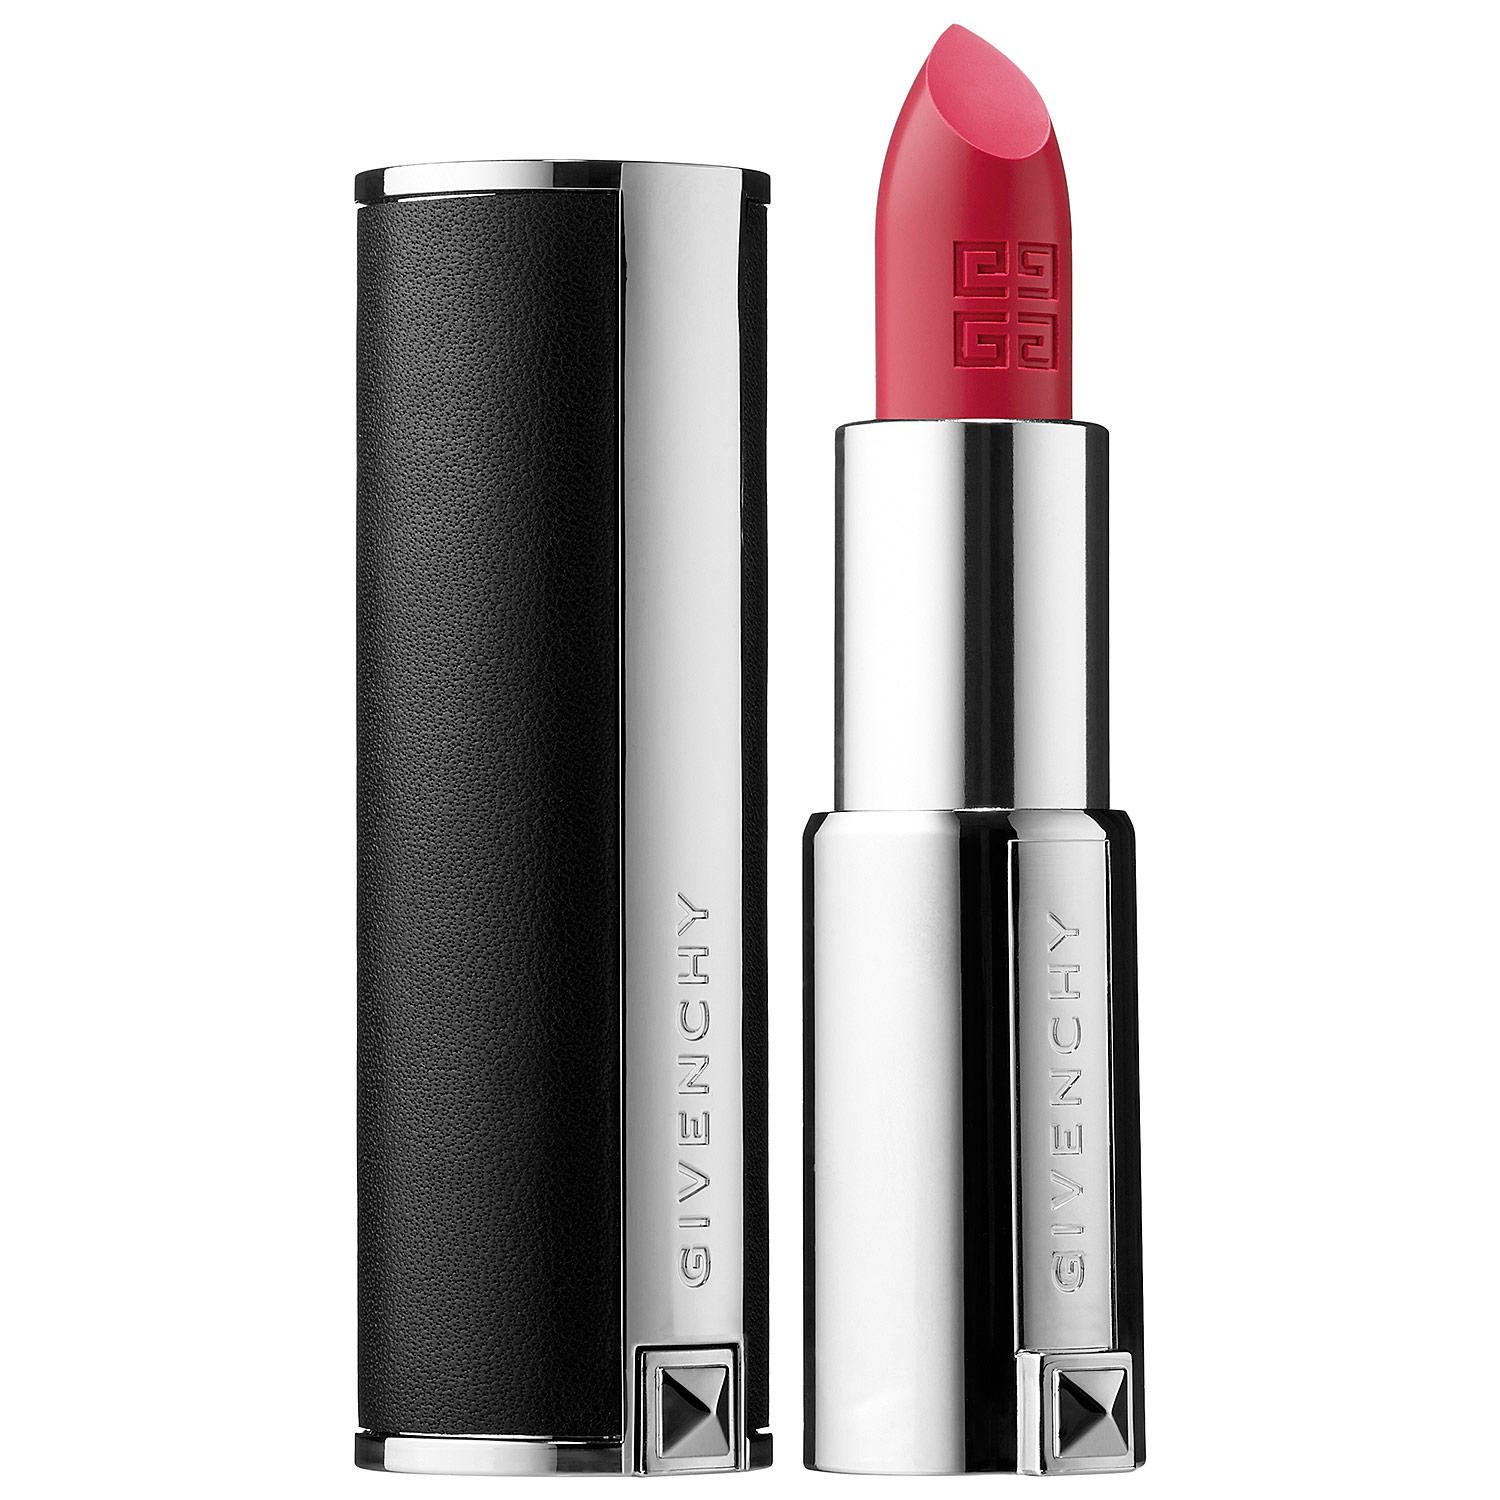 Givenchy Le Rouge Lipstick Rose Perfecto 204 | Glambot.com - Best deals ...